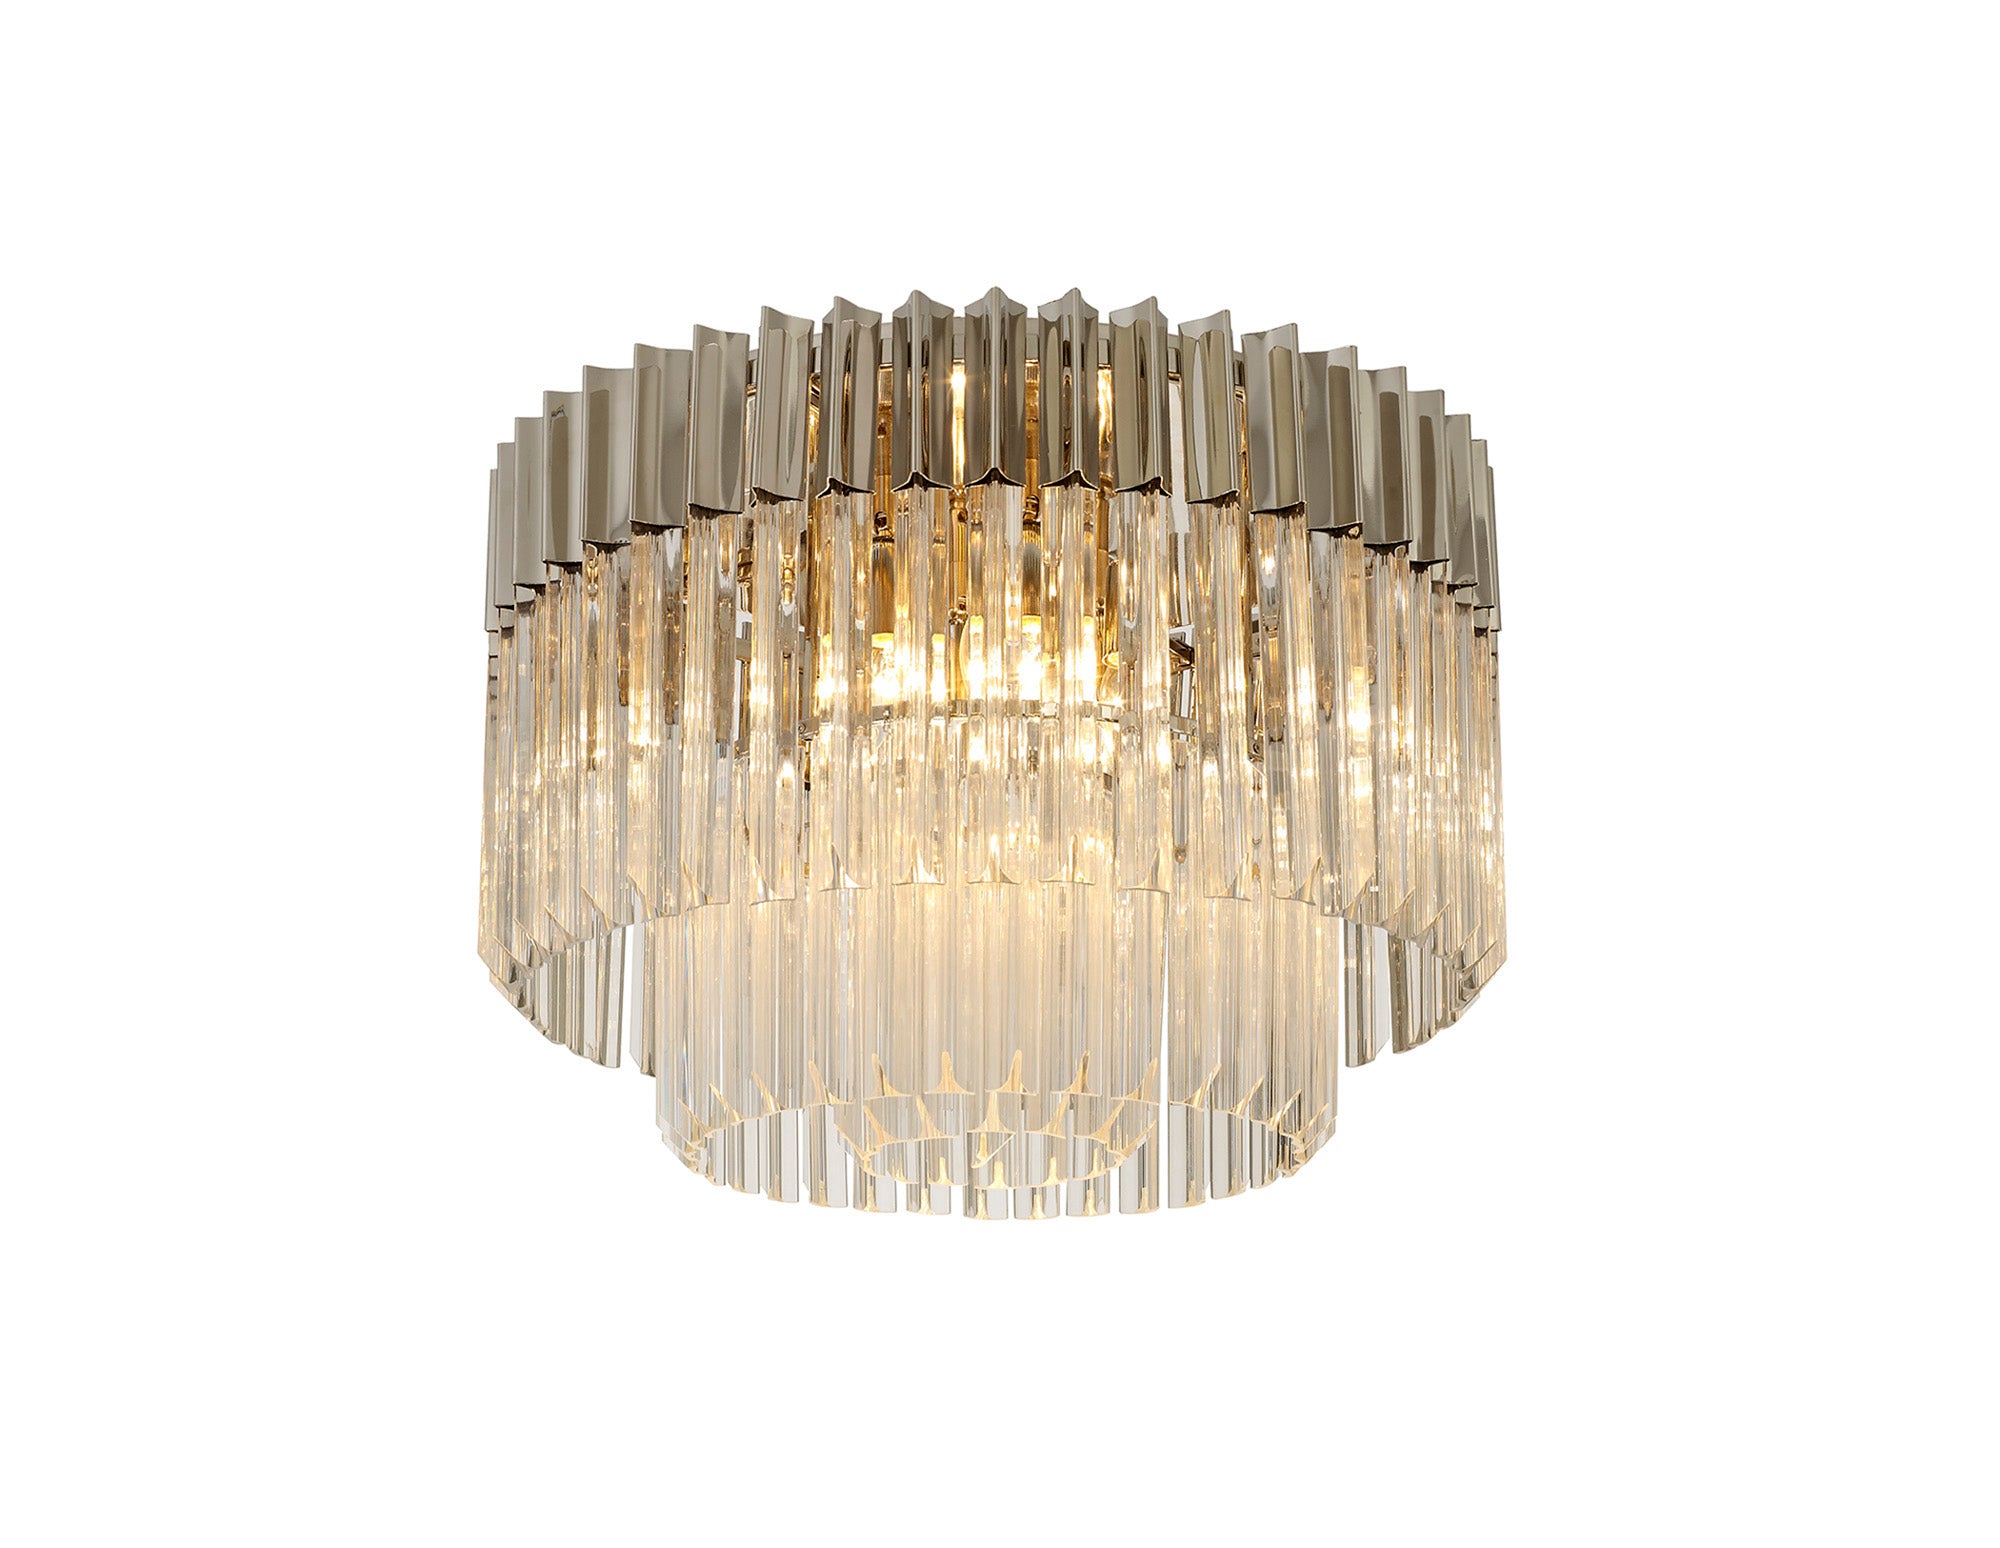 Knightsbridge Ceiling Round 7 Light E14, Polished Nickel/Clear Glass - LO182413. Item Weight: 15.3kg